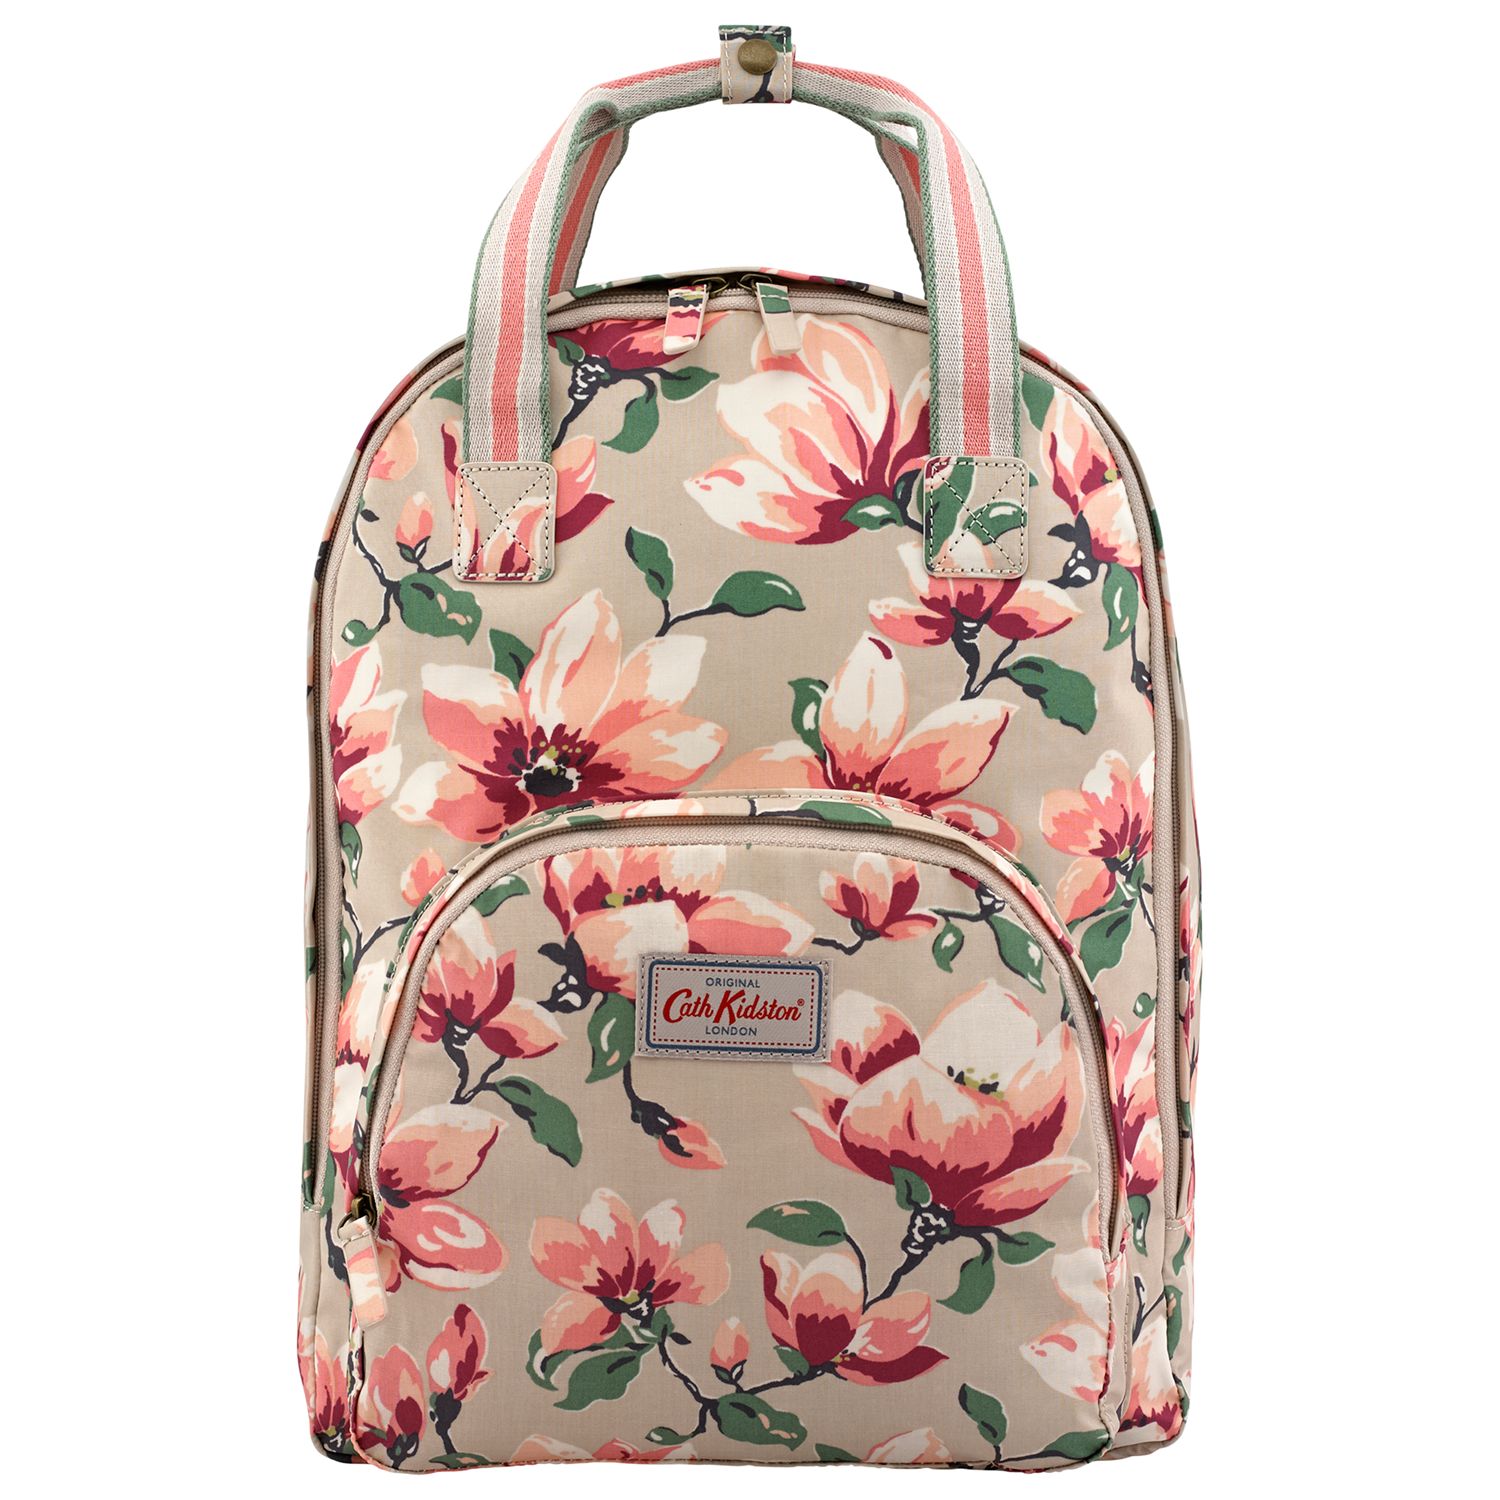 cath kidston multi pocket backpack review